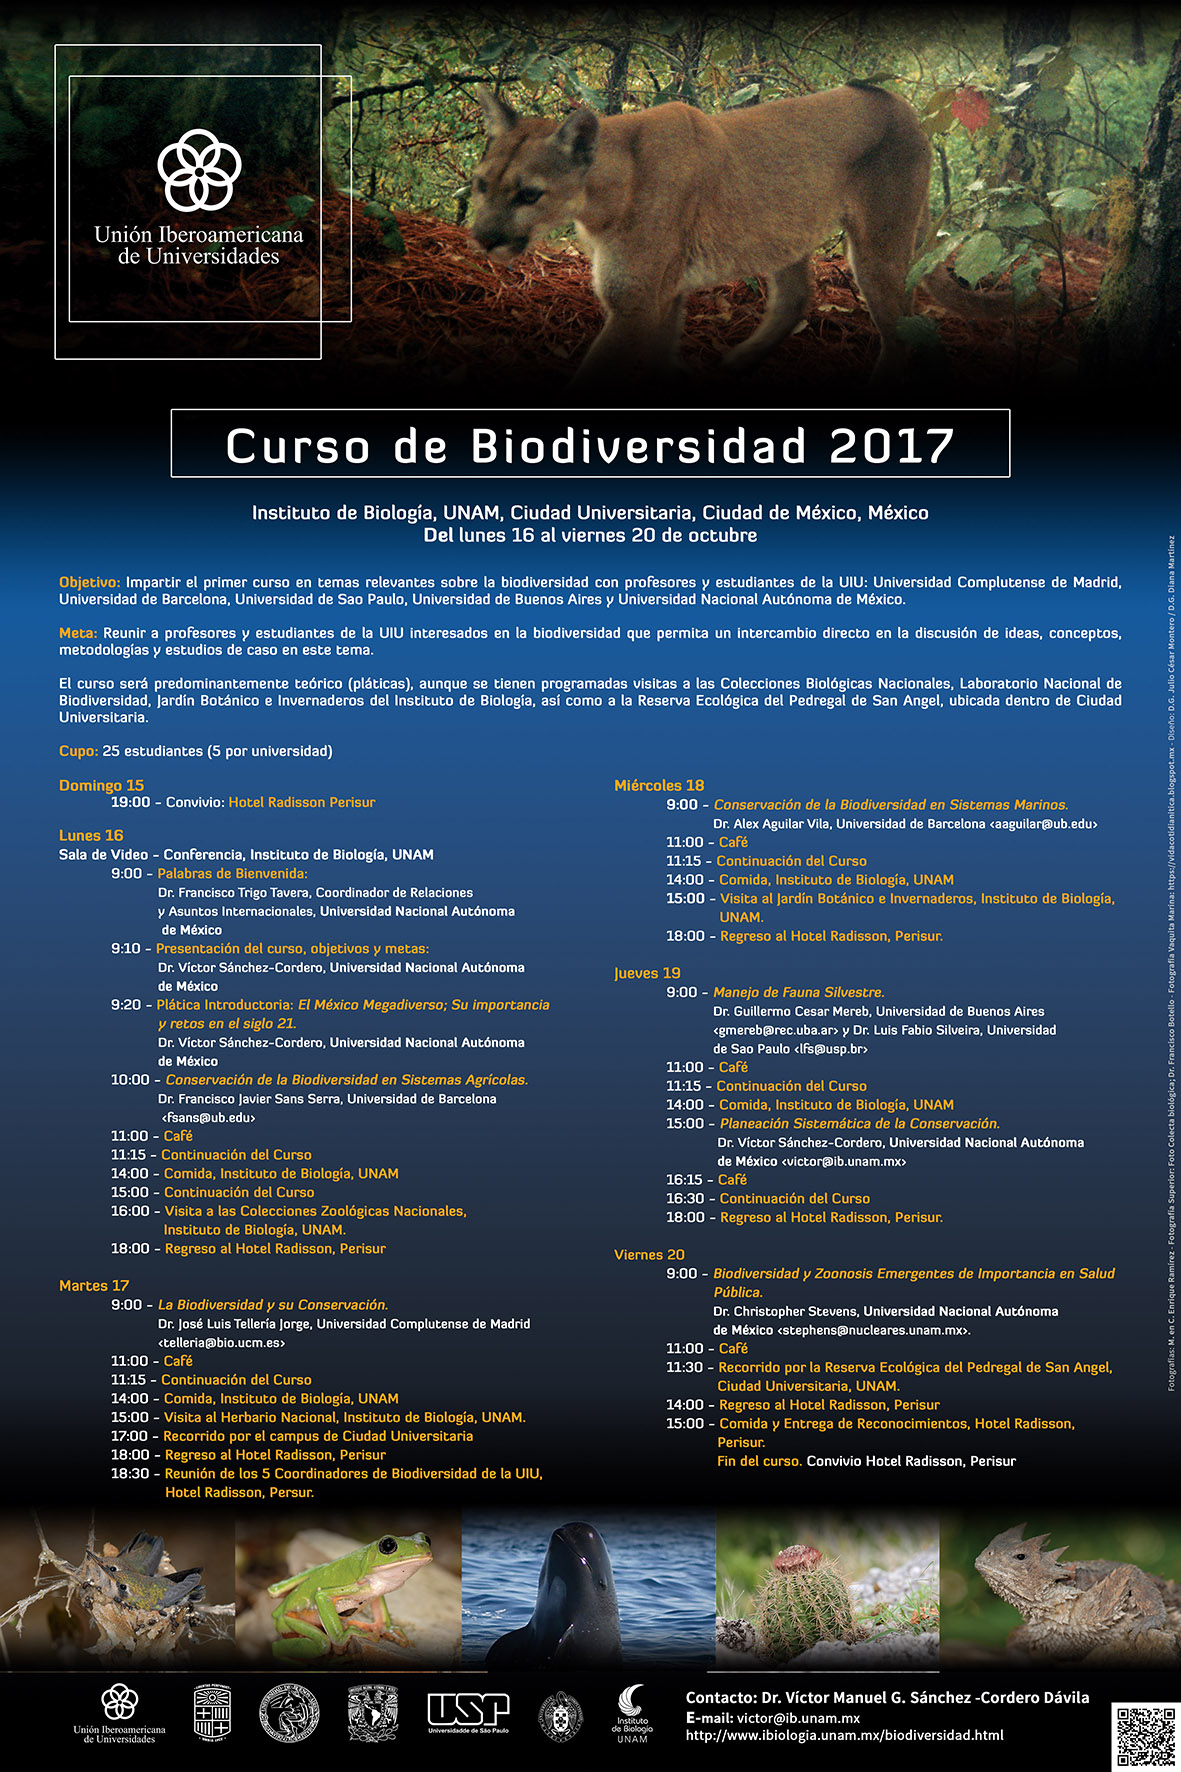 IRBio-UB participates in the course on biodiversity organized by the Ibero-American Union of Univers